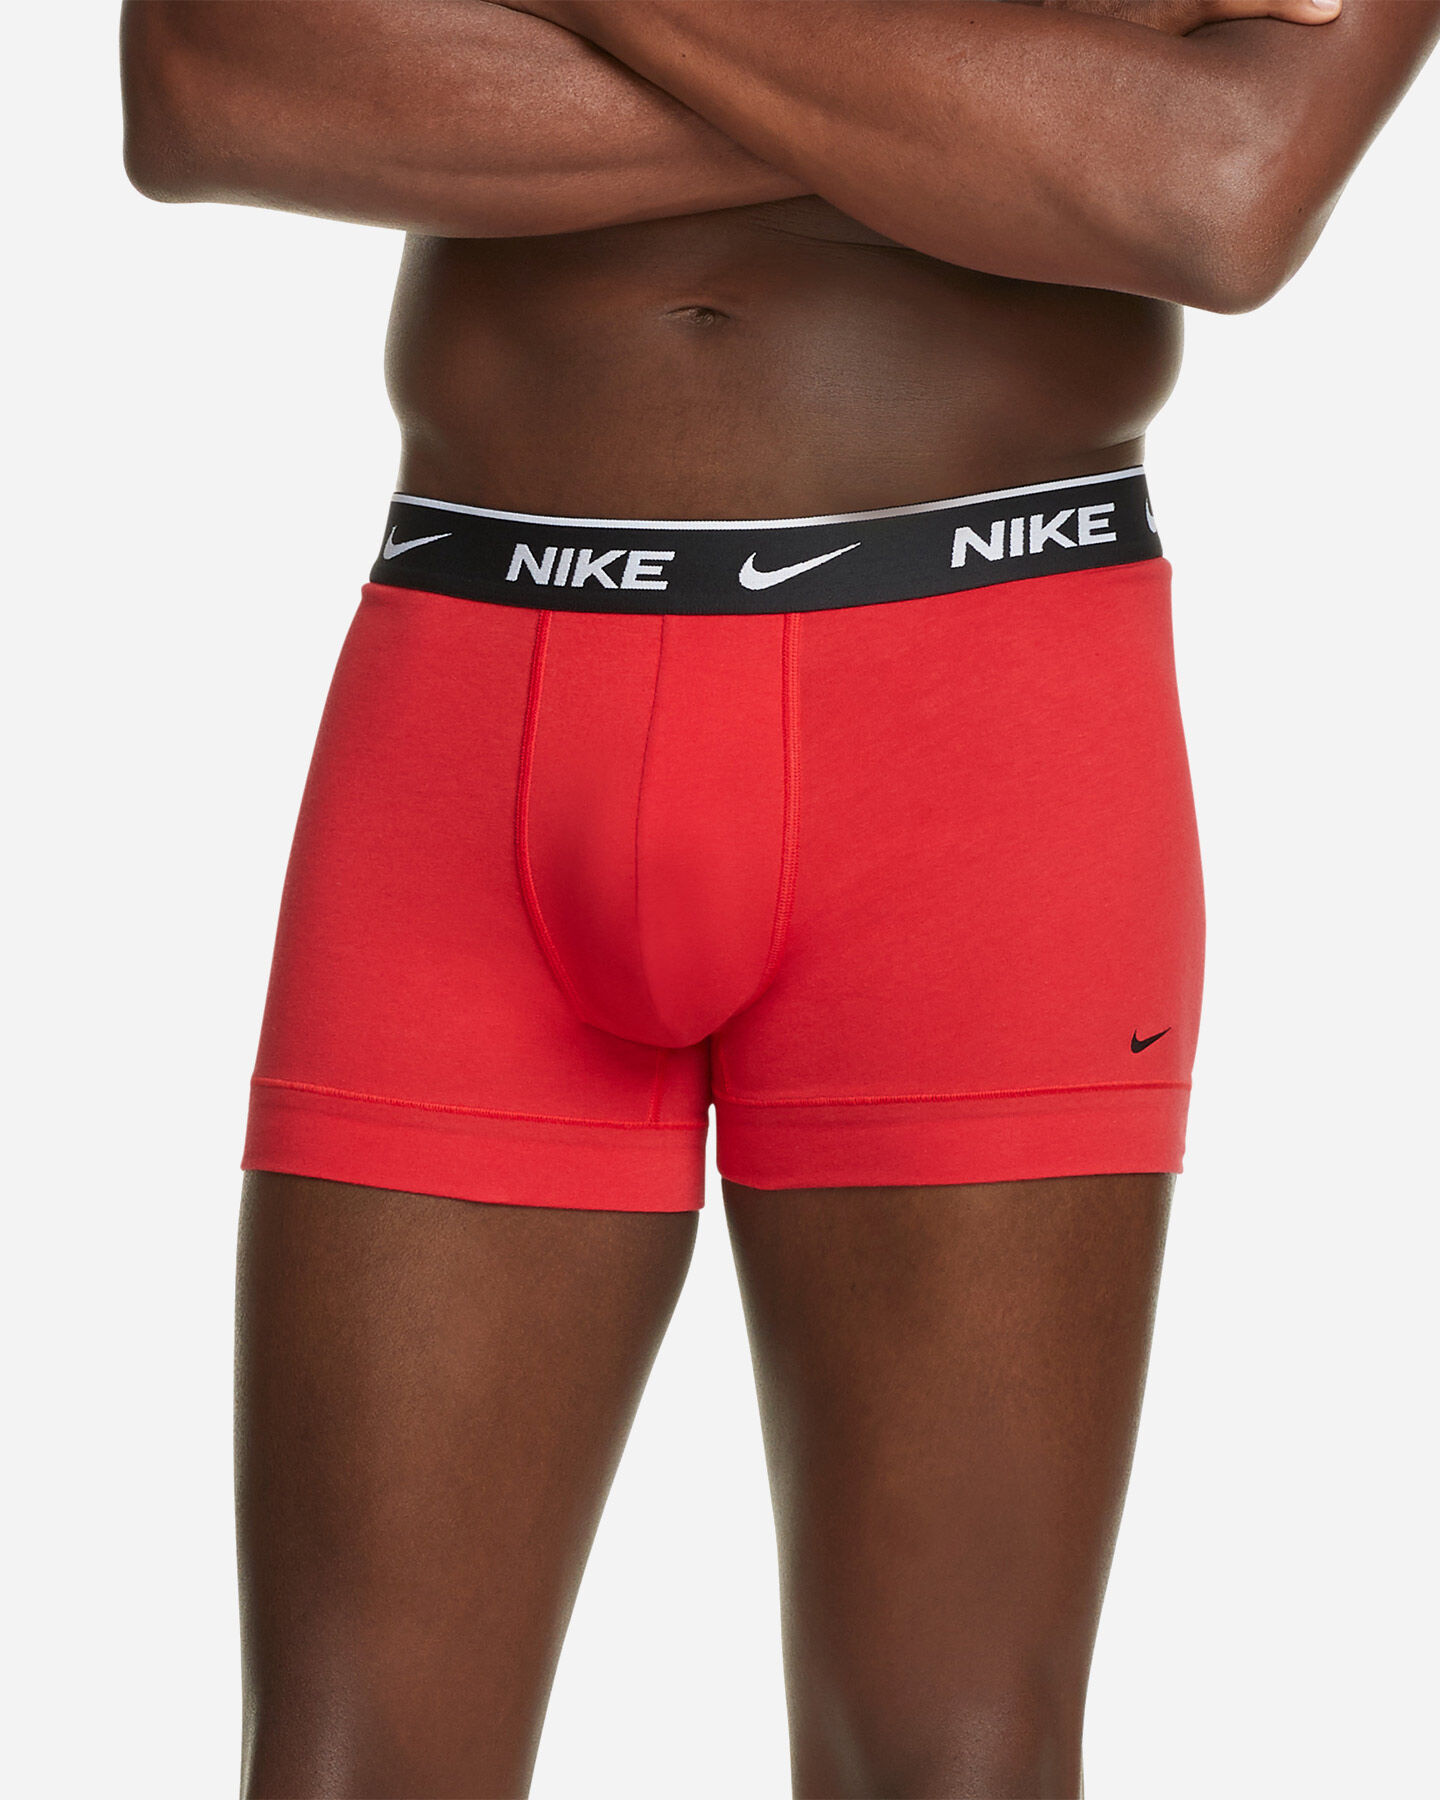  Intimo NIKE 2PACK BOXER EVERYDAY M S4095174|M14|XS scatto 3